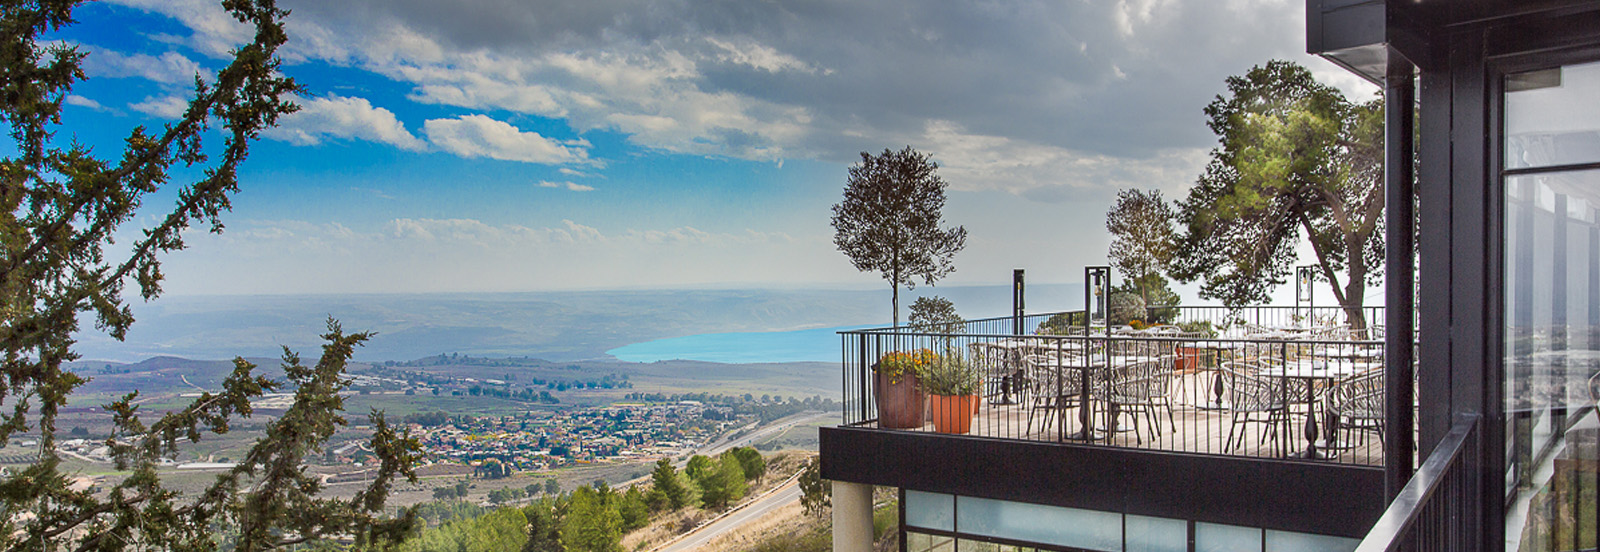 Hotels in the Galilee 